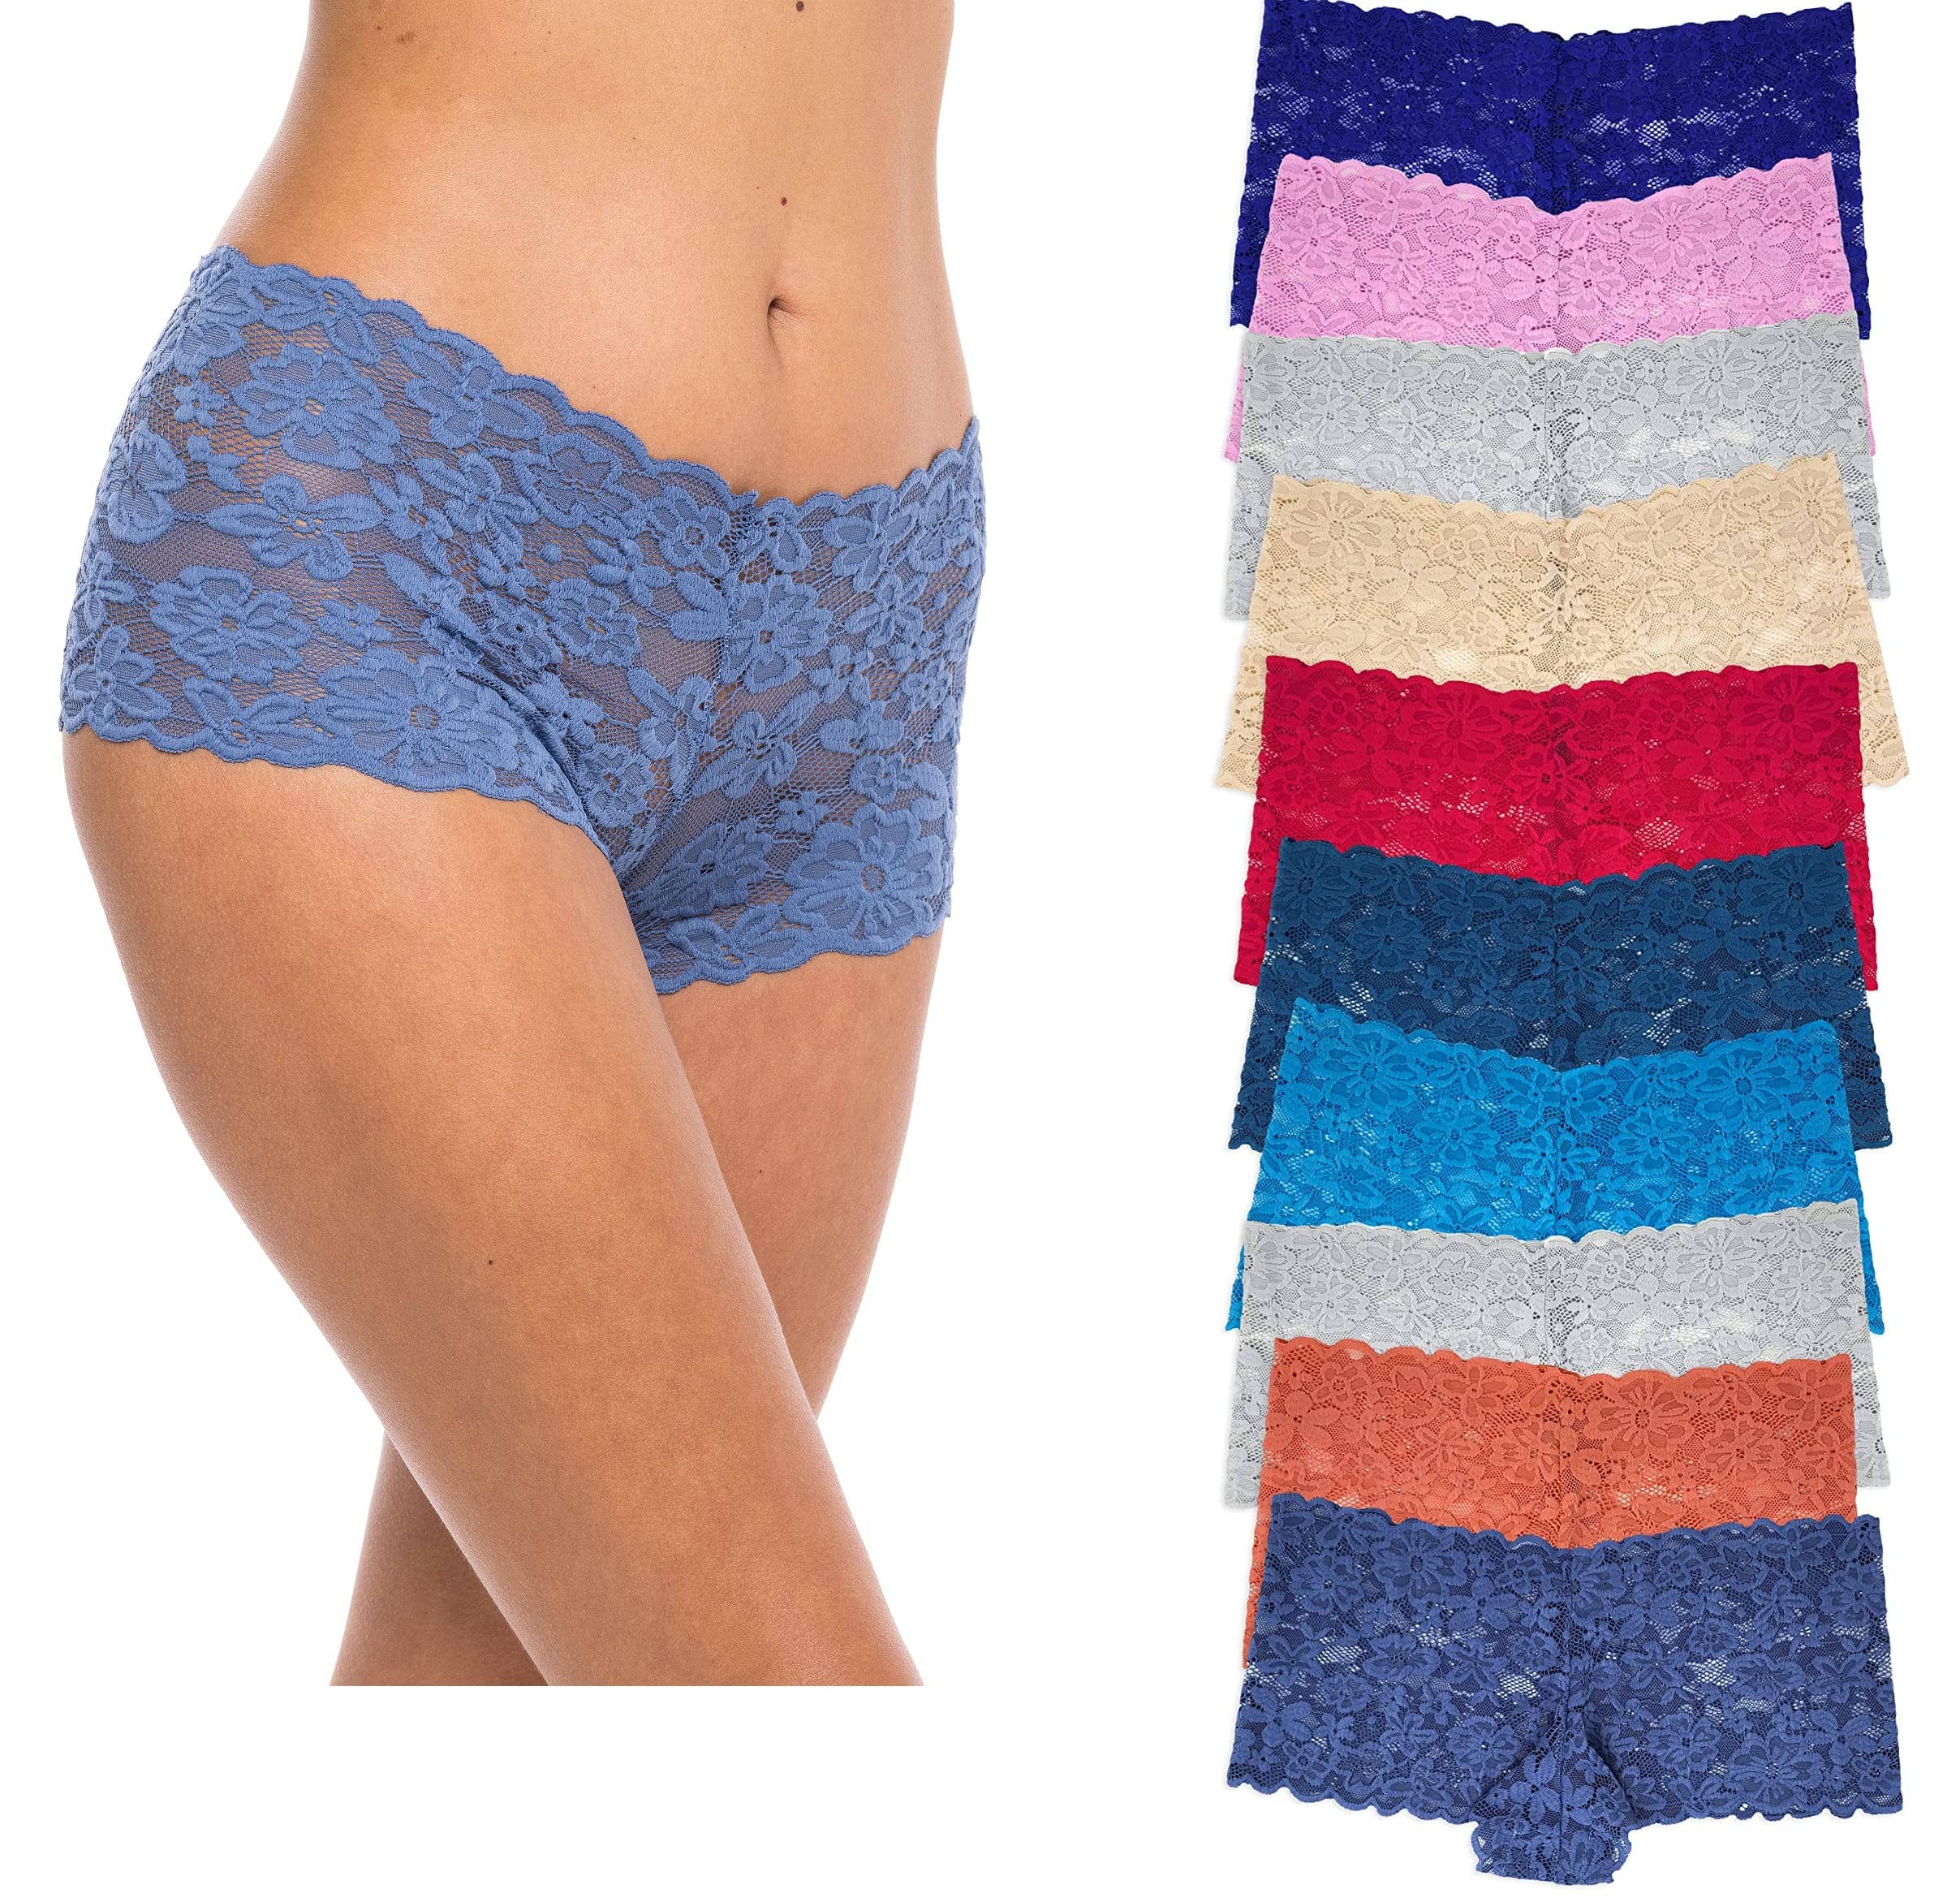 Wholesale Days of the Week Underwear Cotton, Lace, Seamless